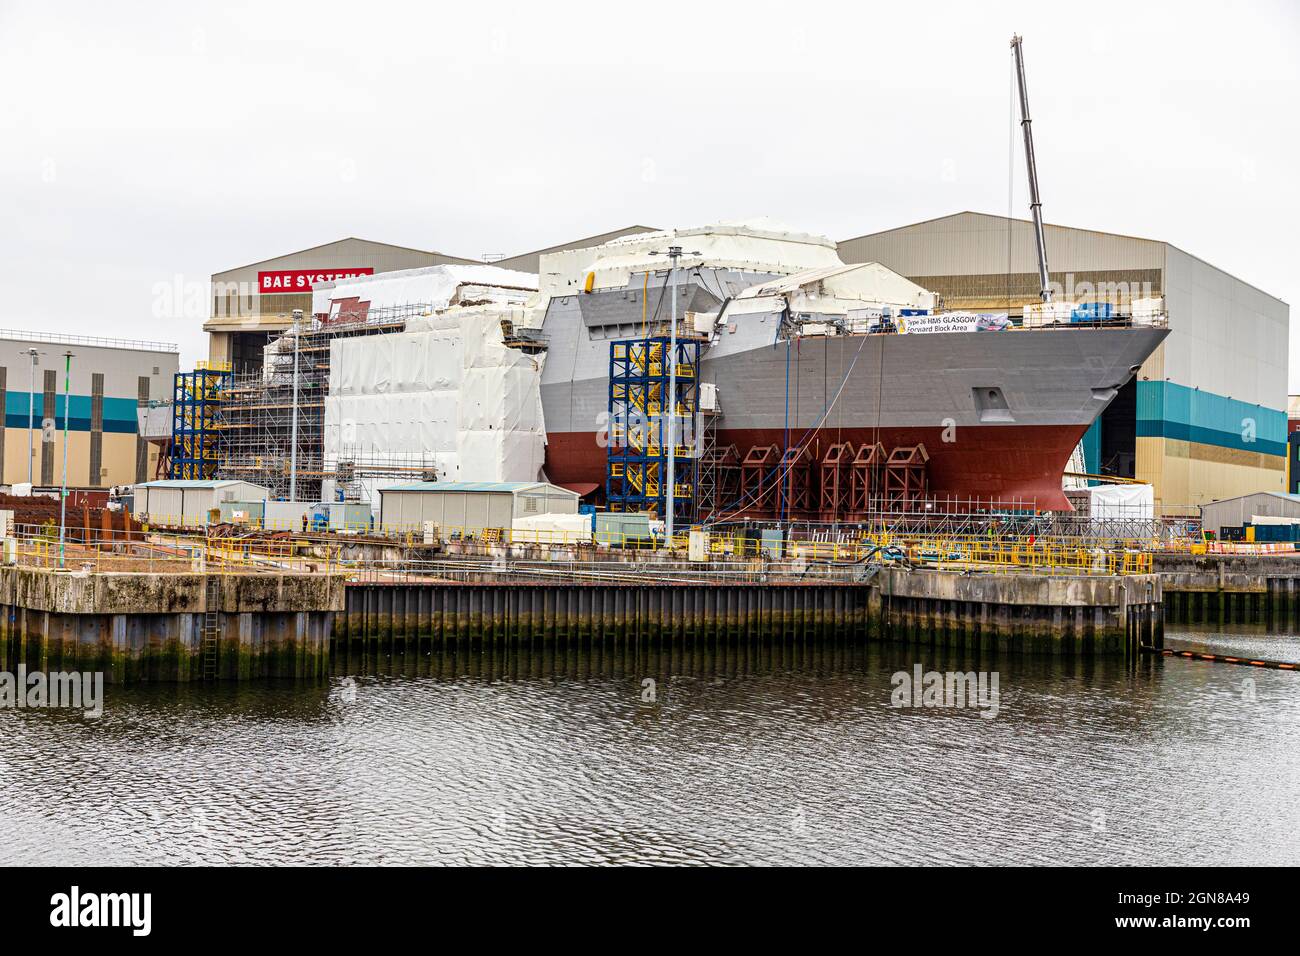 HMS Glasgow the first City Class Type 26 frigate under construction at BAE Systems shipyard on the banks of the River Clyde, Glasgow, Scotland UK Stock Photo